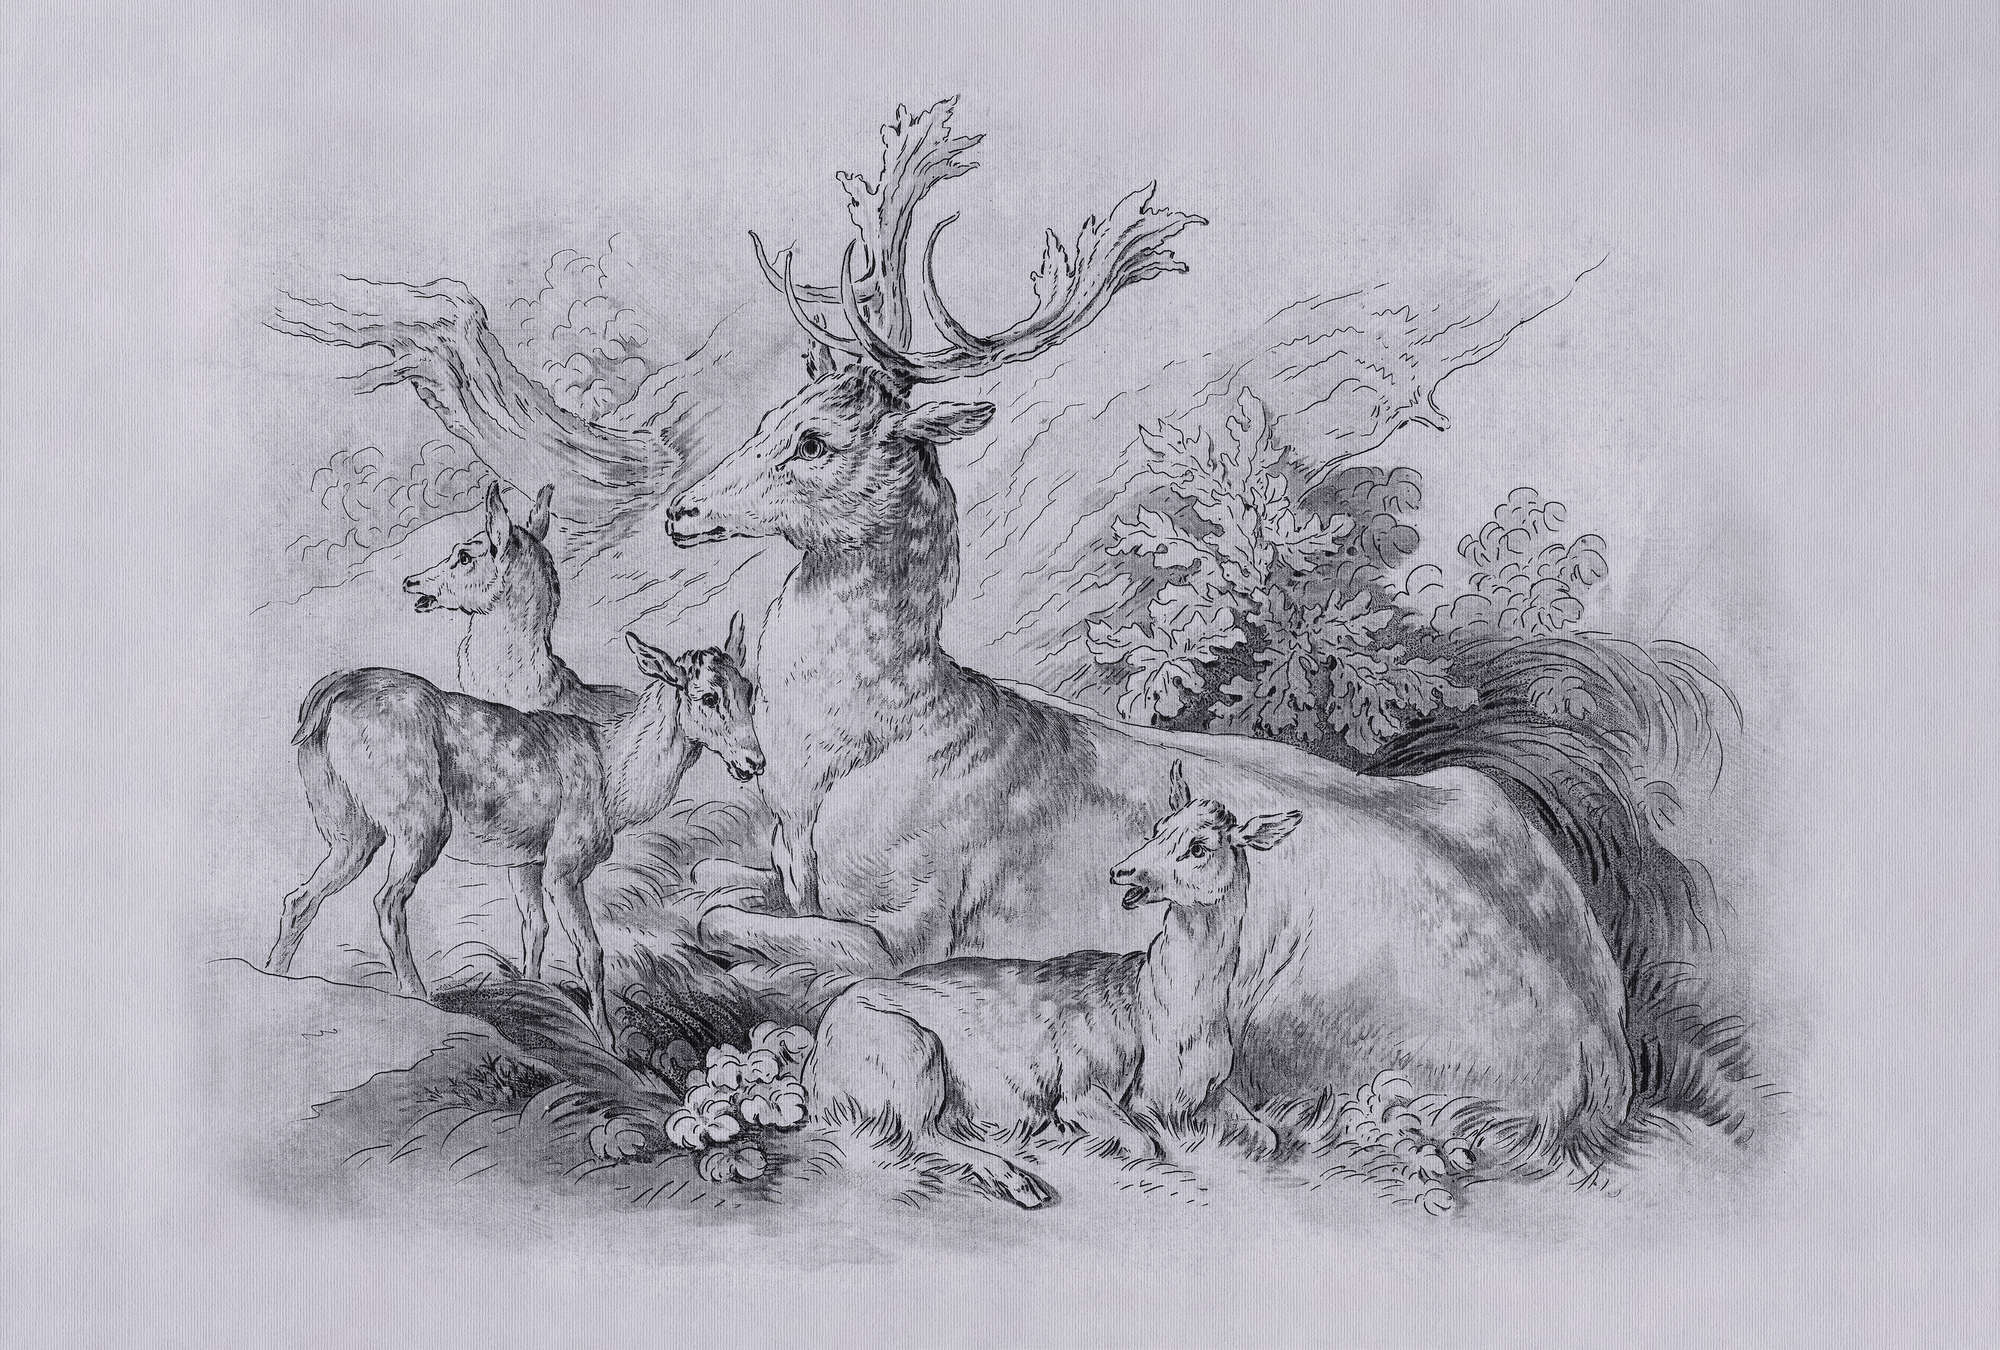             On the Grass 2 - wall mural deer & stag vintage drawing in grey
        